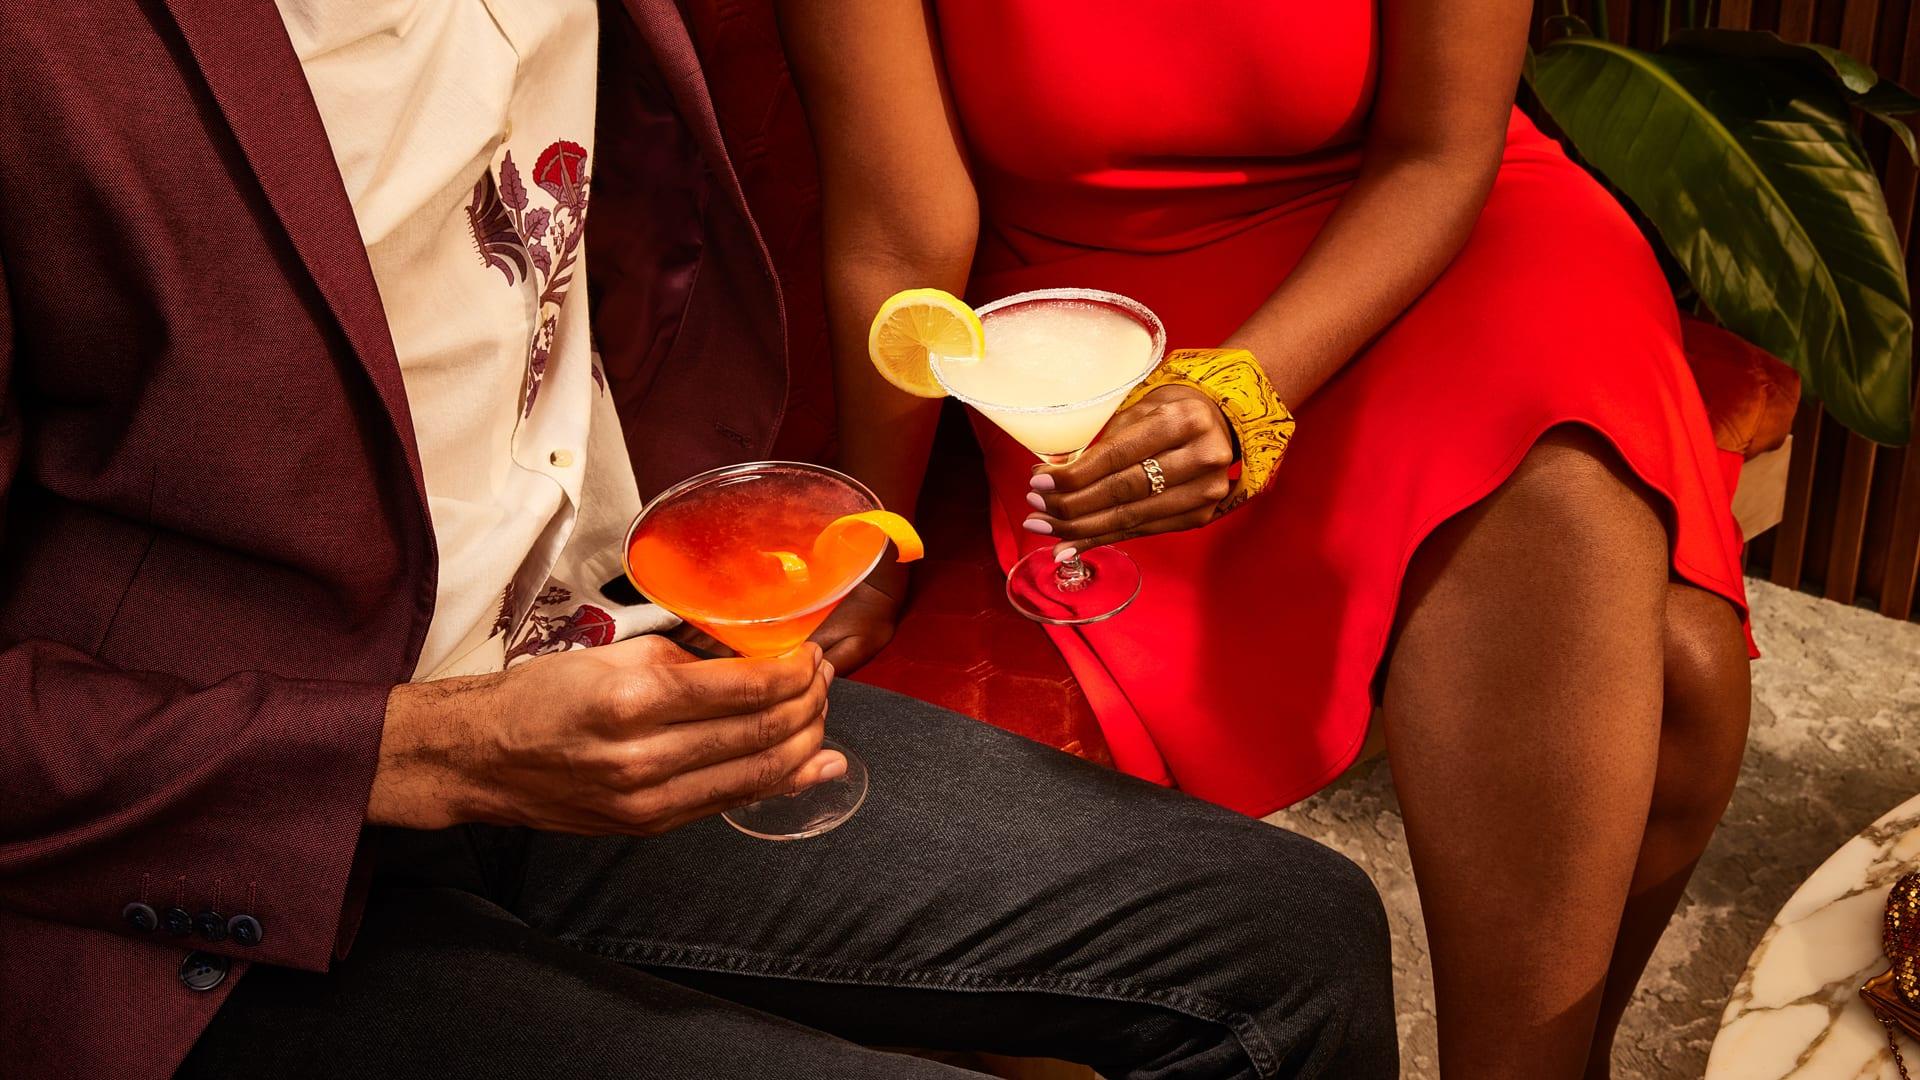 Two people enjoying two Smirnoff cocktails